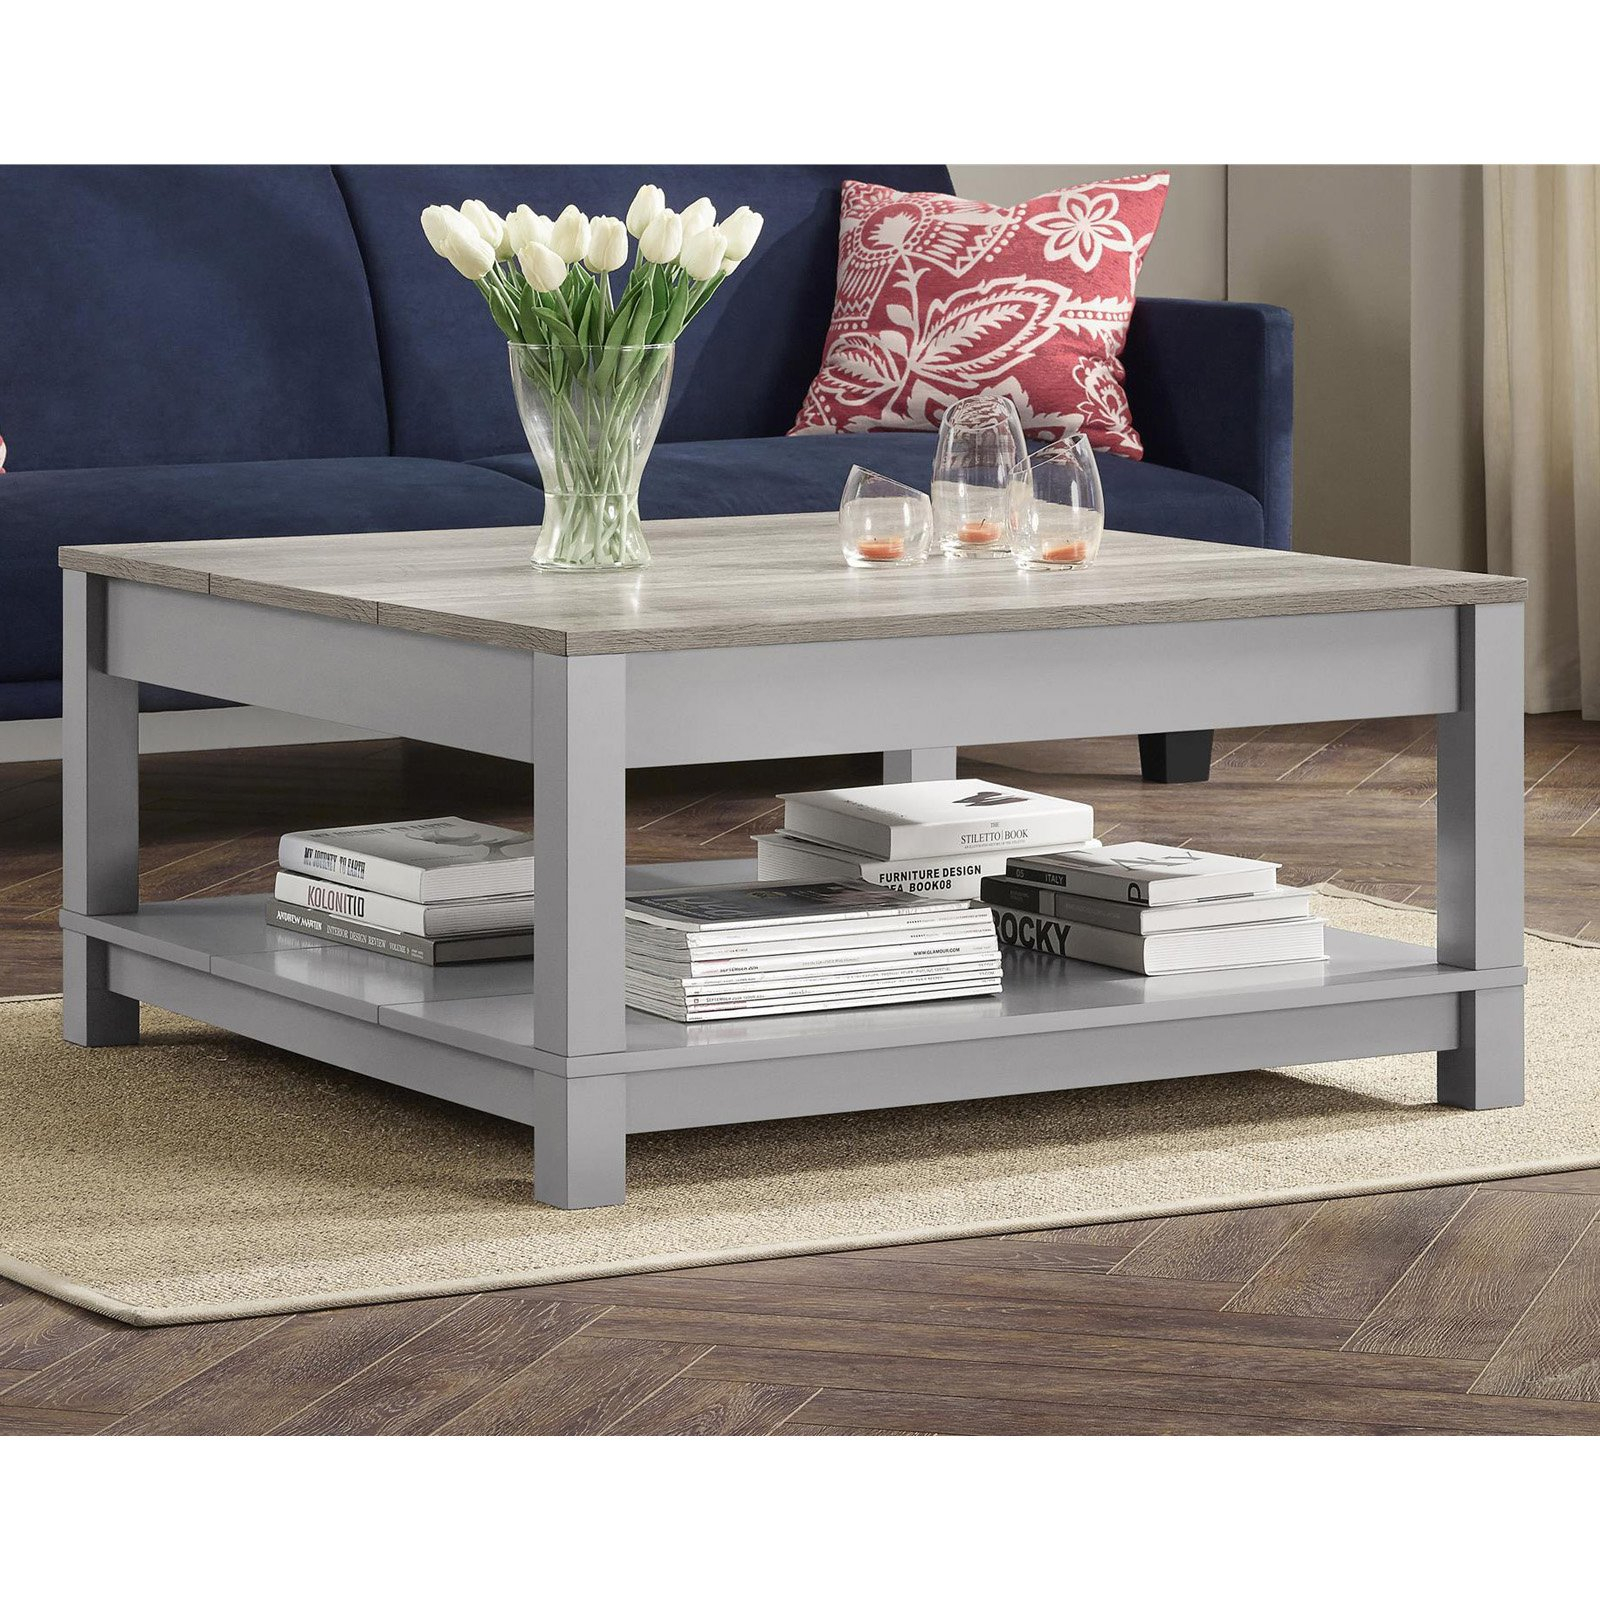 Better Homes And Gardens Langley Bay Coffee Table Multiple Colors intended for size 1600 X 1600